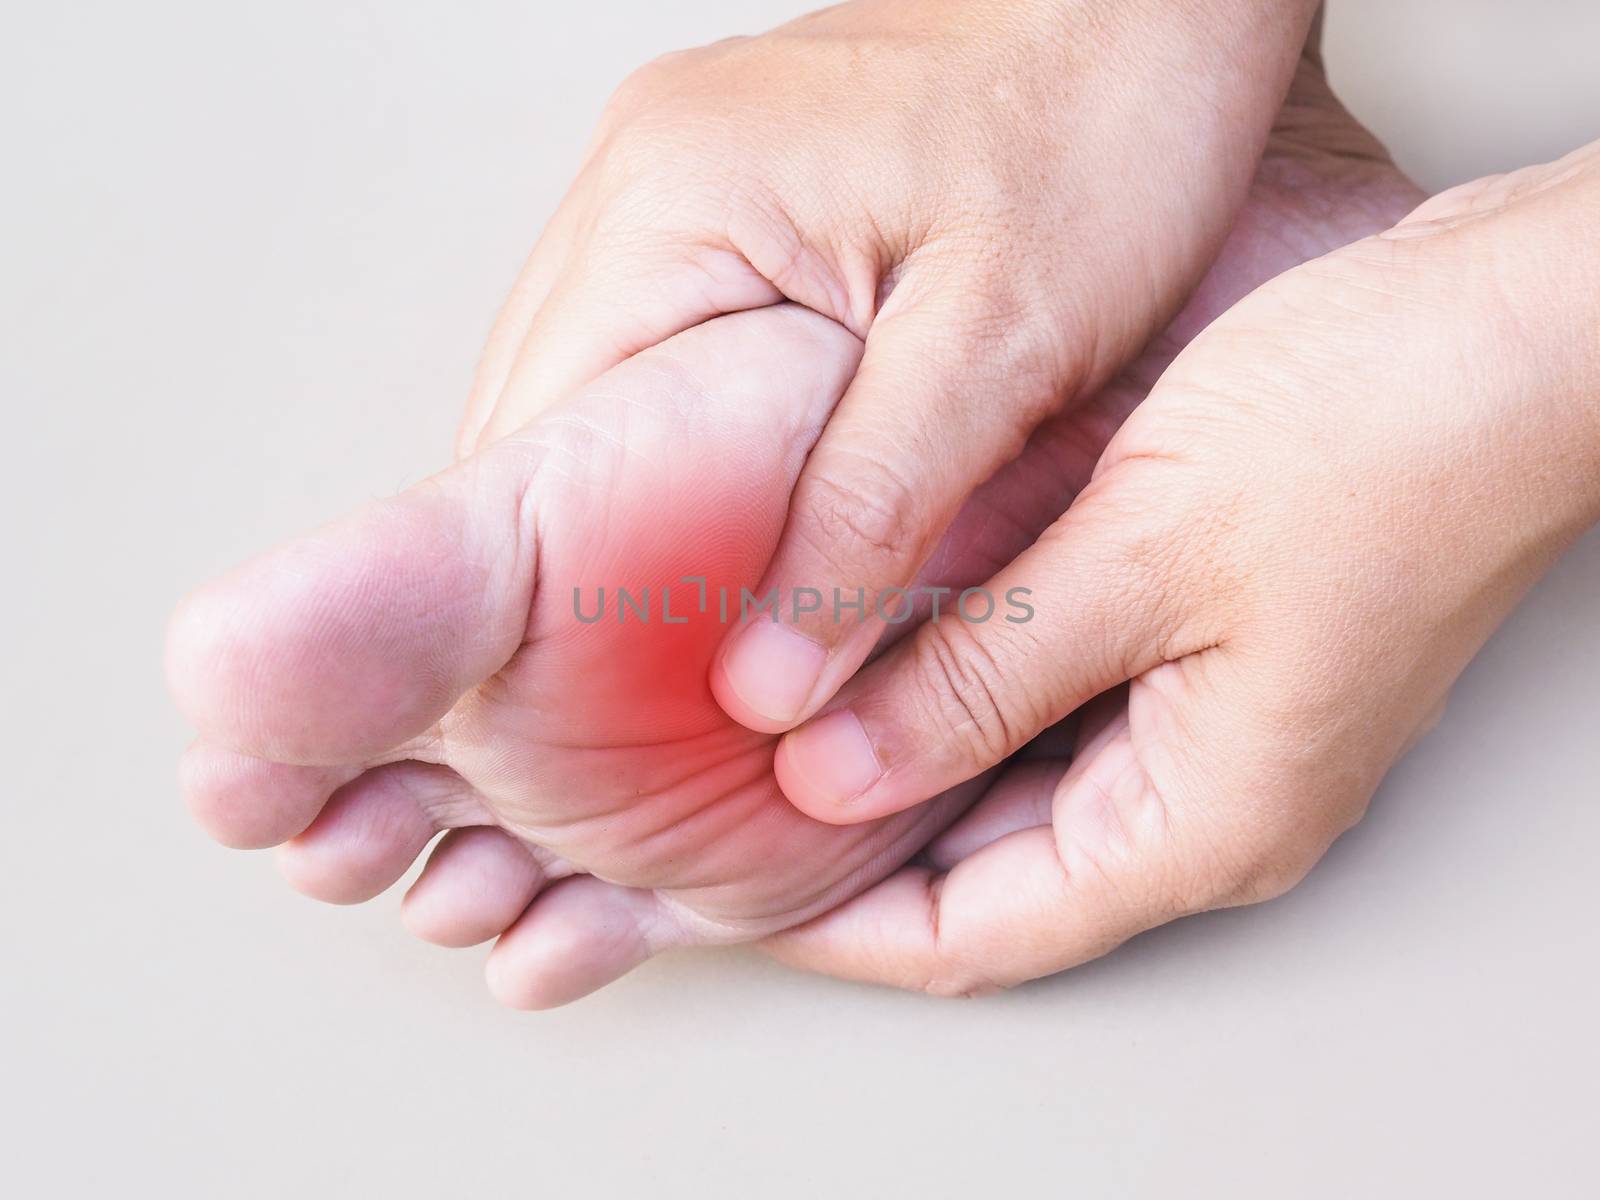 Young asian woman suffering pain in ankle, heel pain and soles of feet using hand to massage body to relieve pain, medical symptom and healthcare concept.